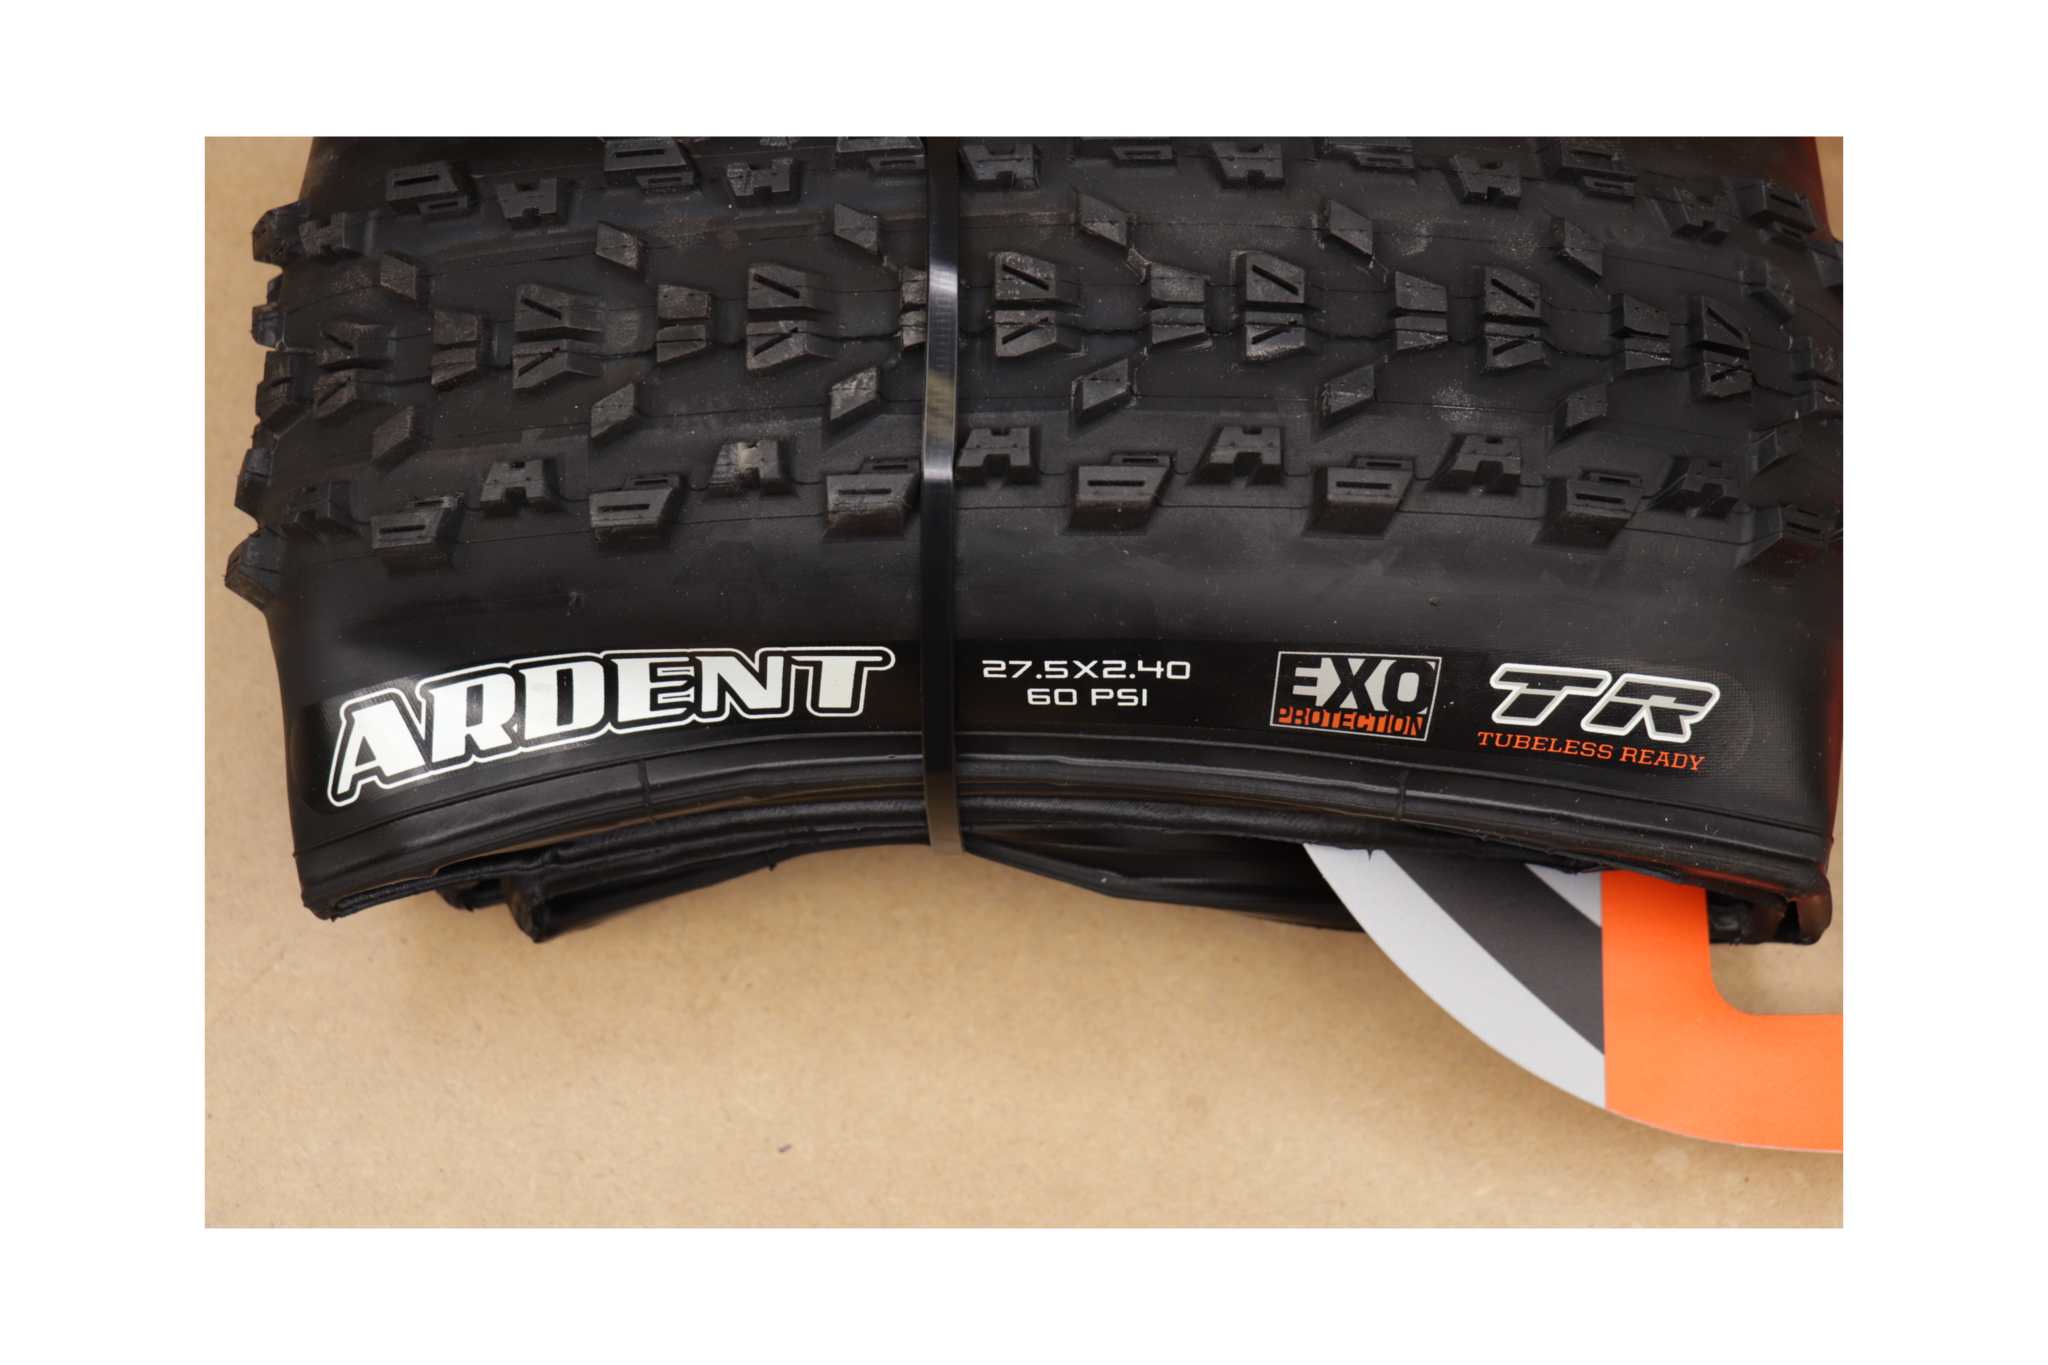 Maxxis Ardent 27.5 x 2.40 EXO Tubeless Ready Tire